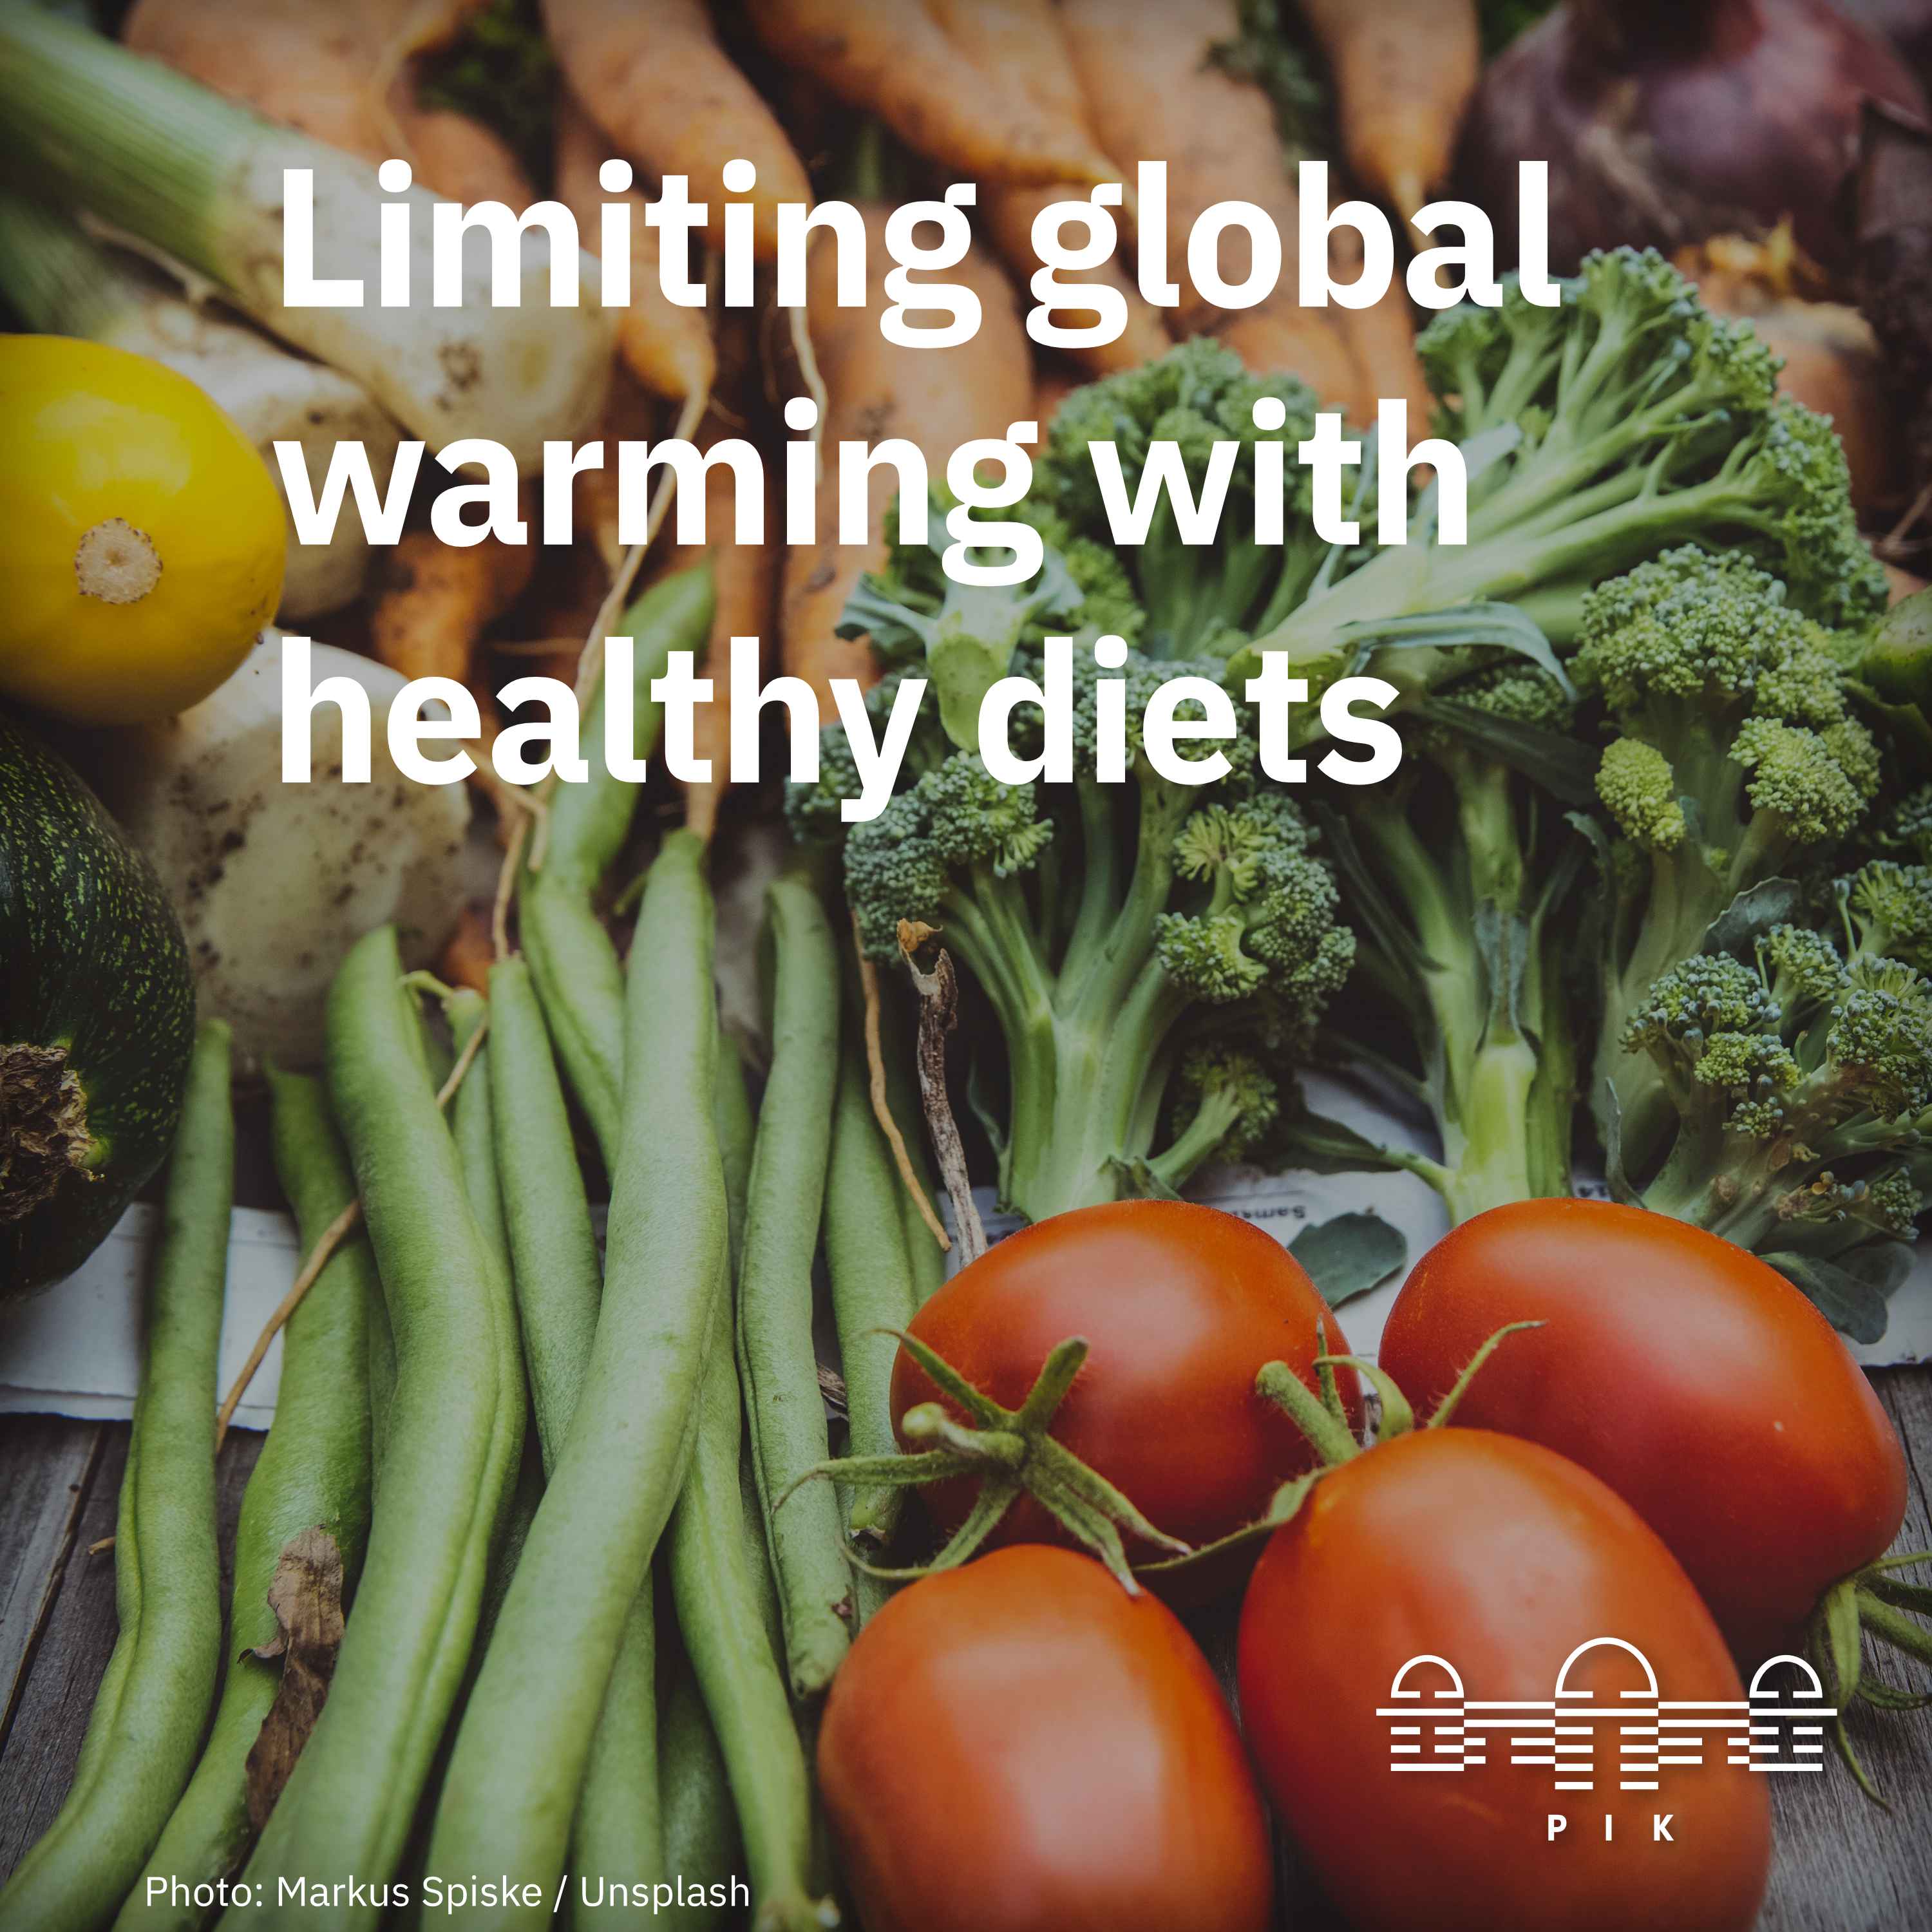 Food matters: Healthy diets increase the economic and physical feasibility of 1.5°C